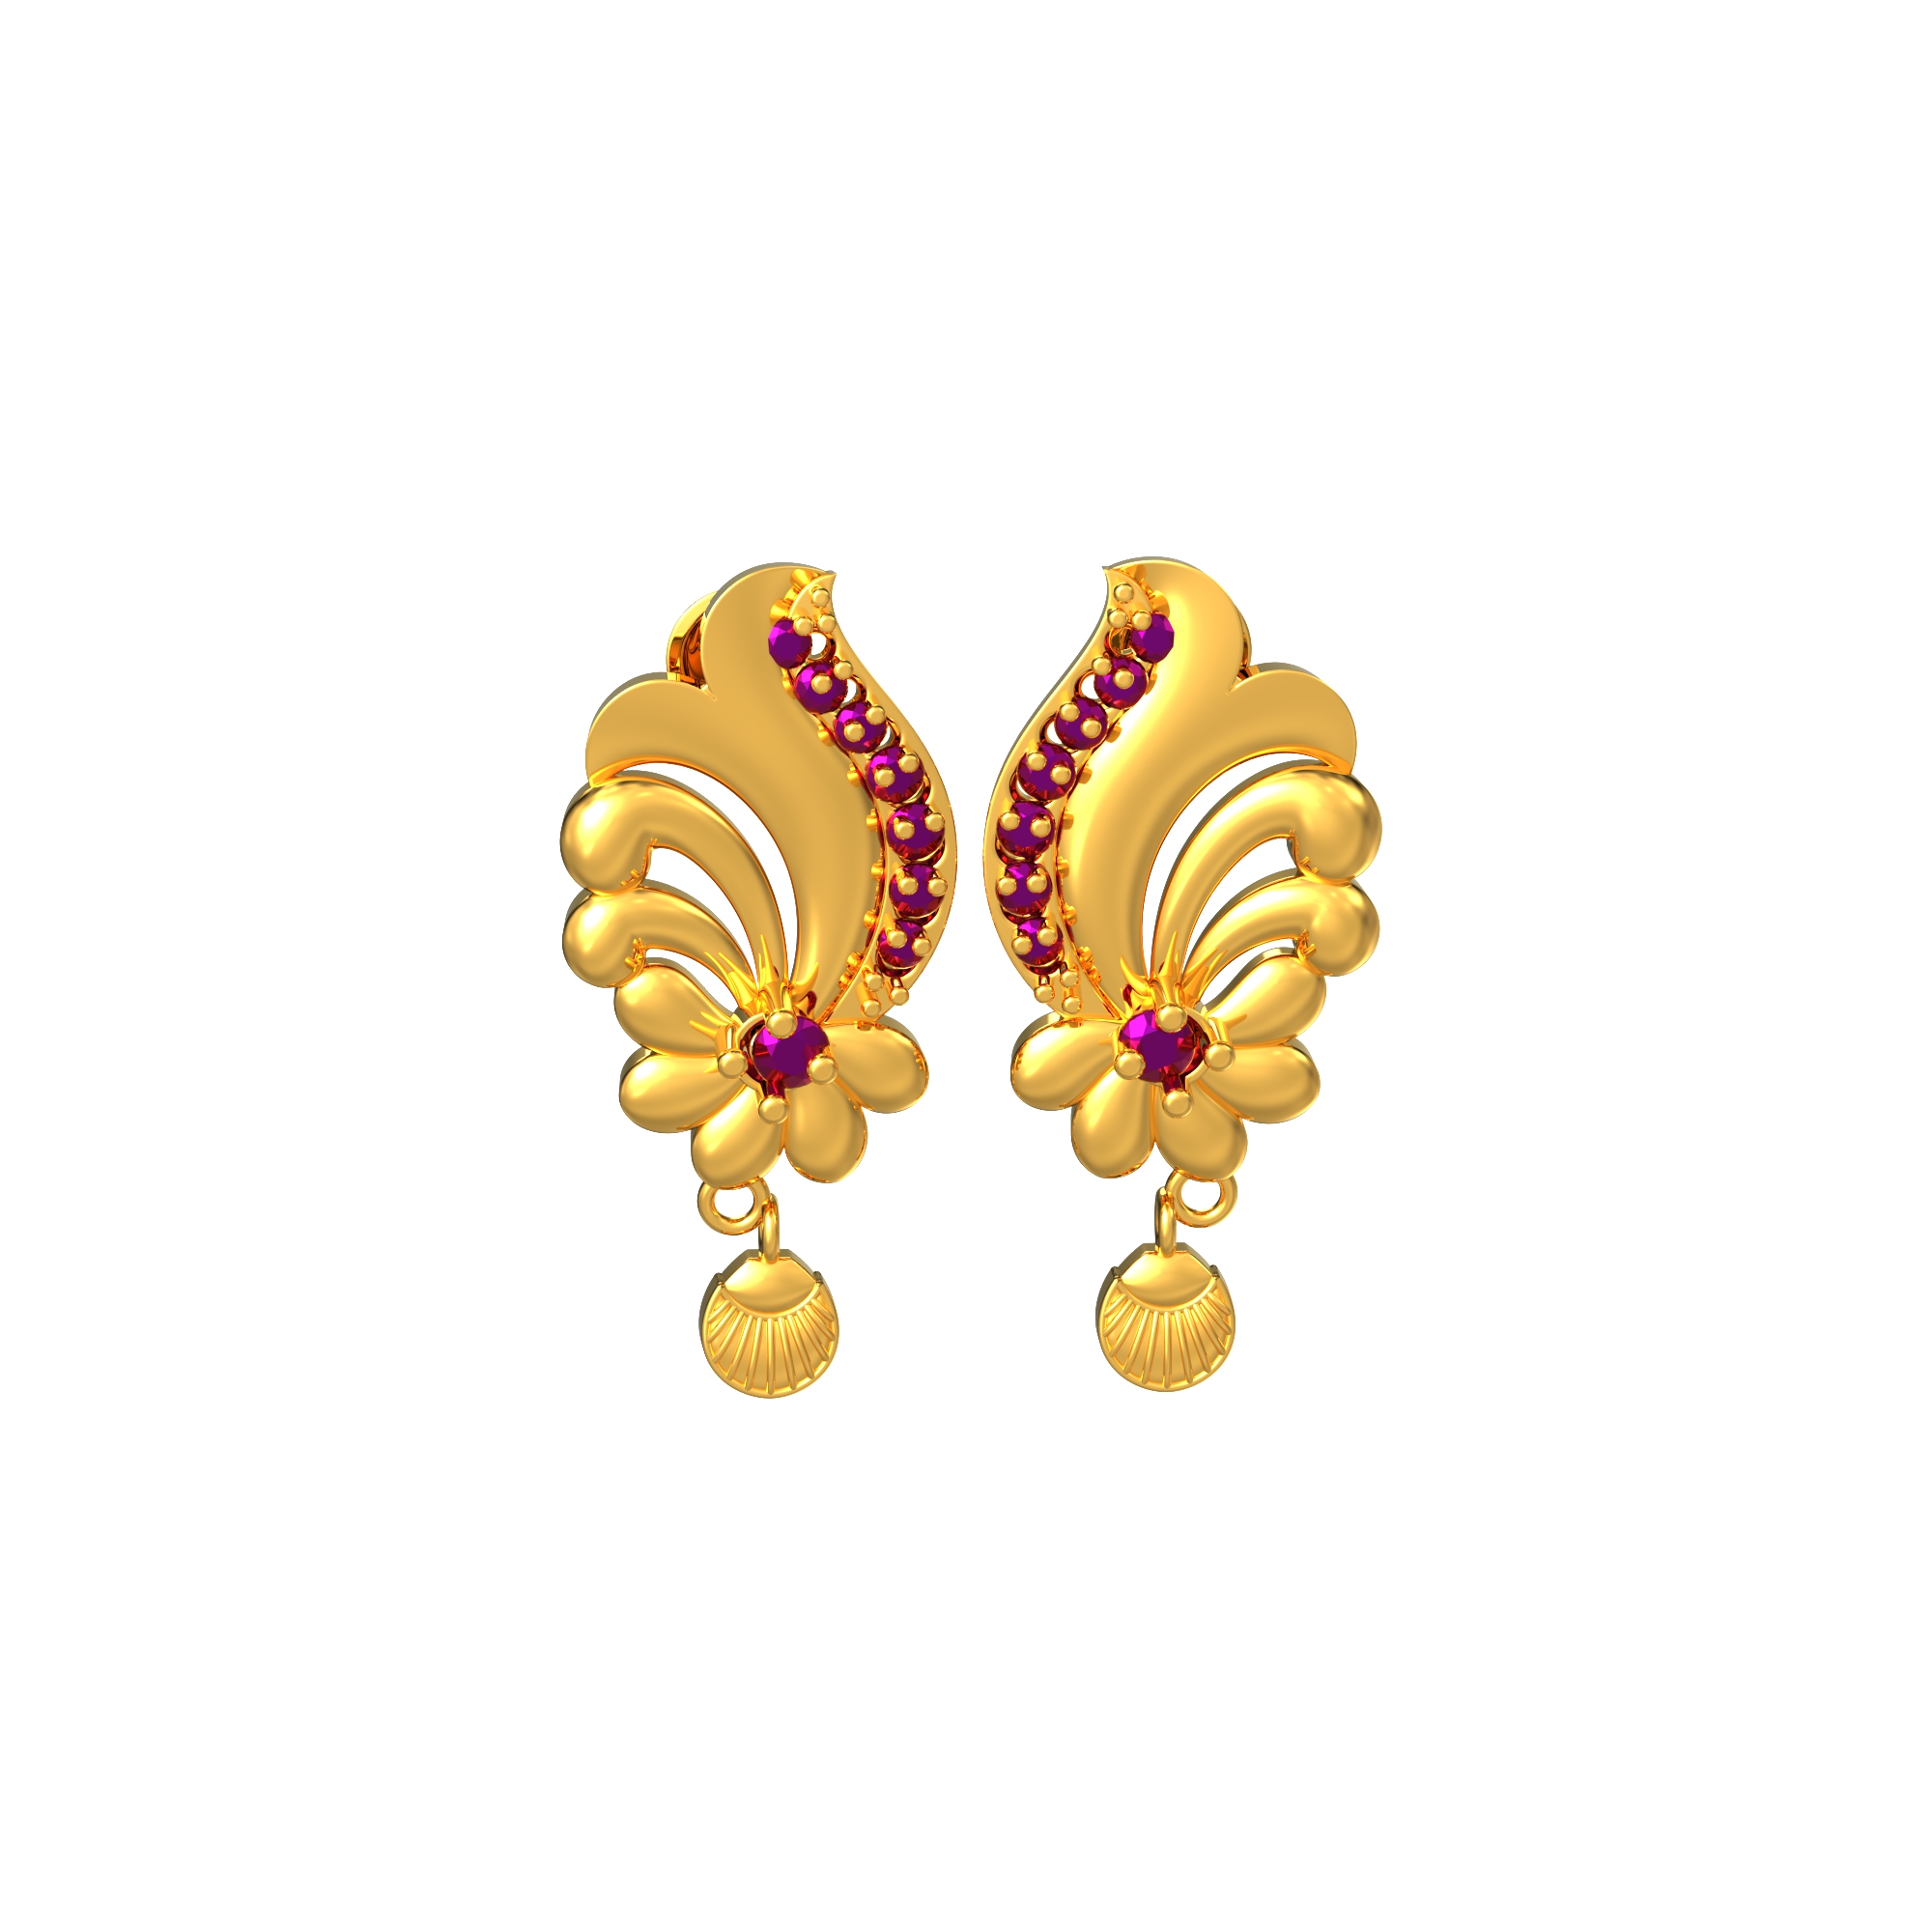 Pretty Floral Design Gold Earrings